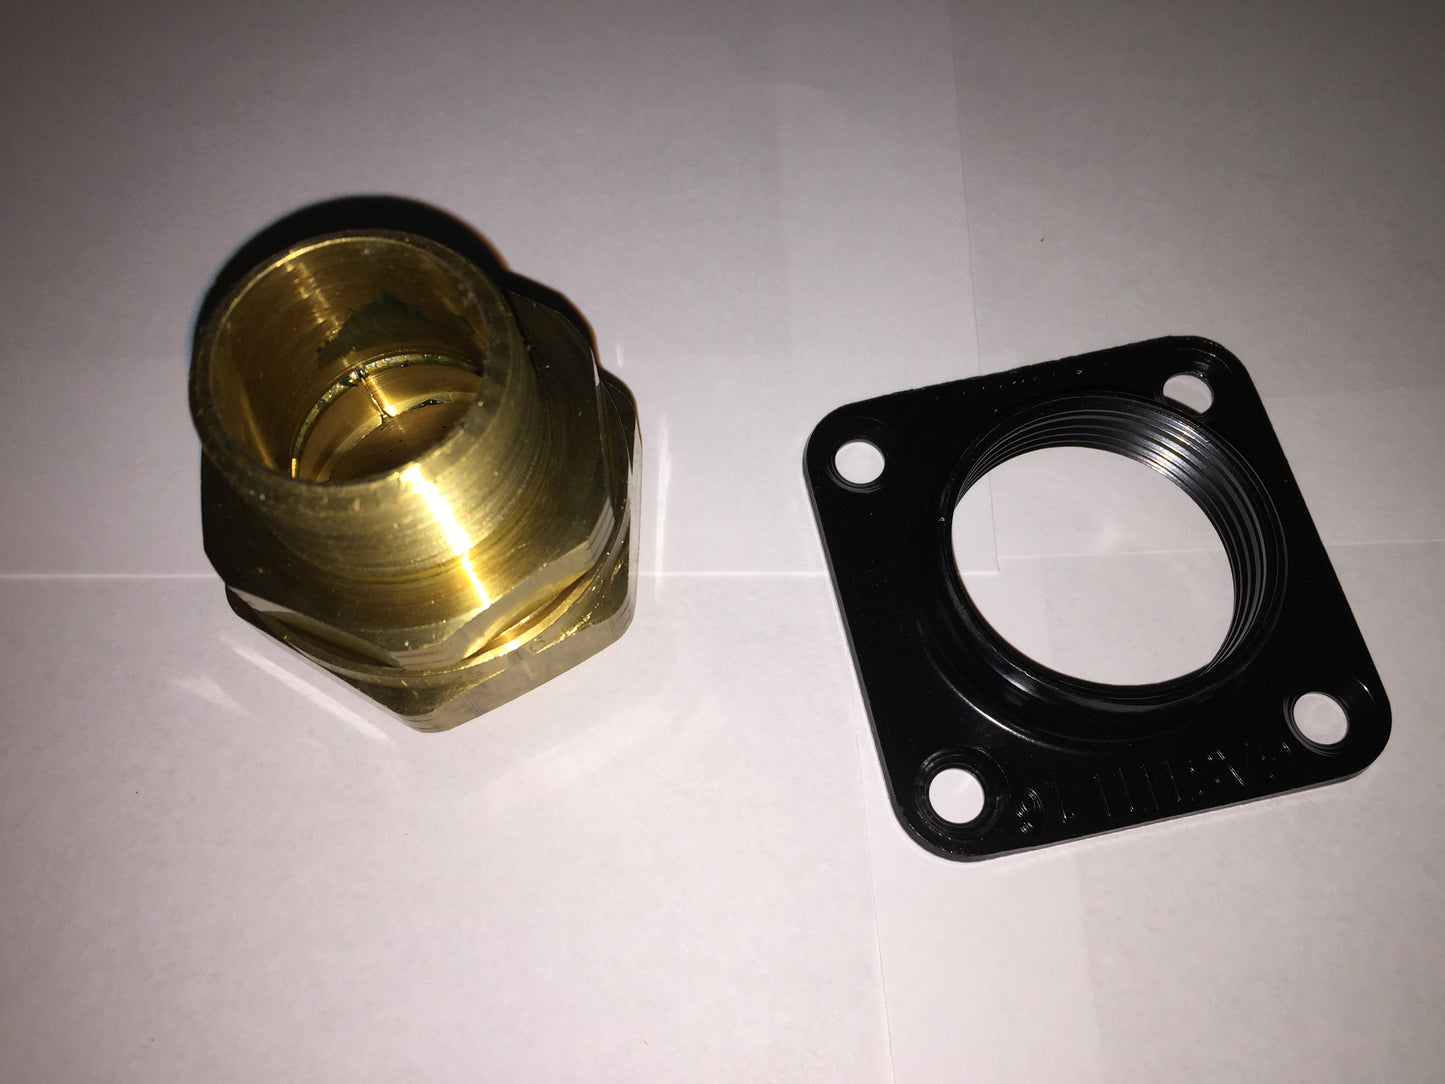 1" TERMINATION MOUNT FOR GAS LINE APPLICATIONS, SOLD INDIVIDUALLY